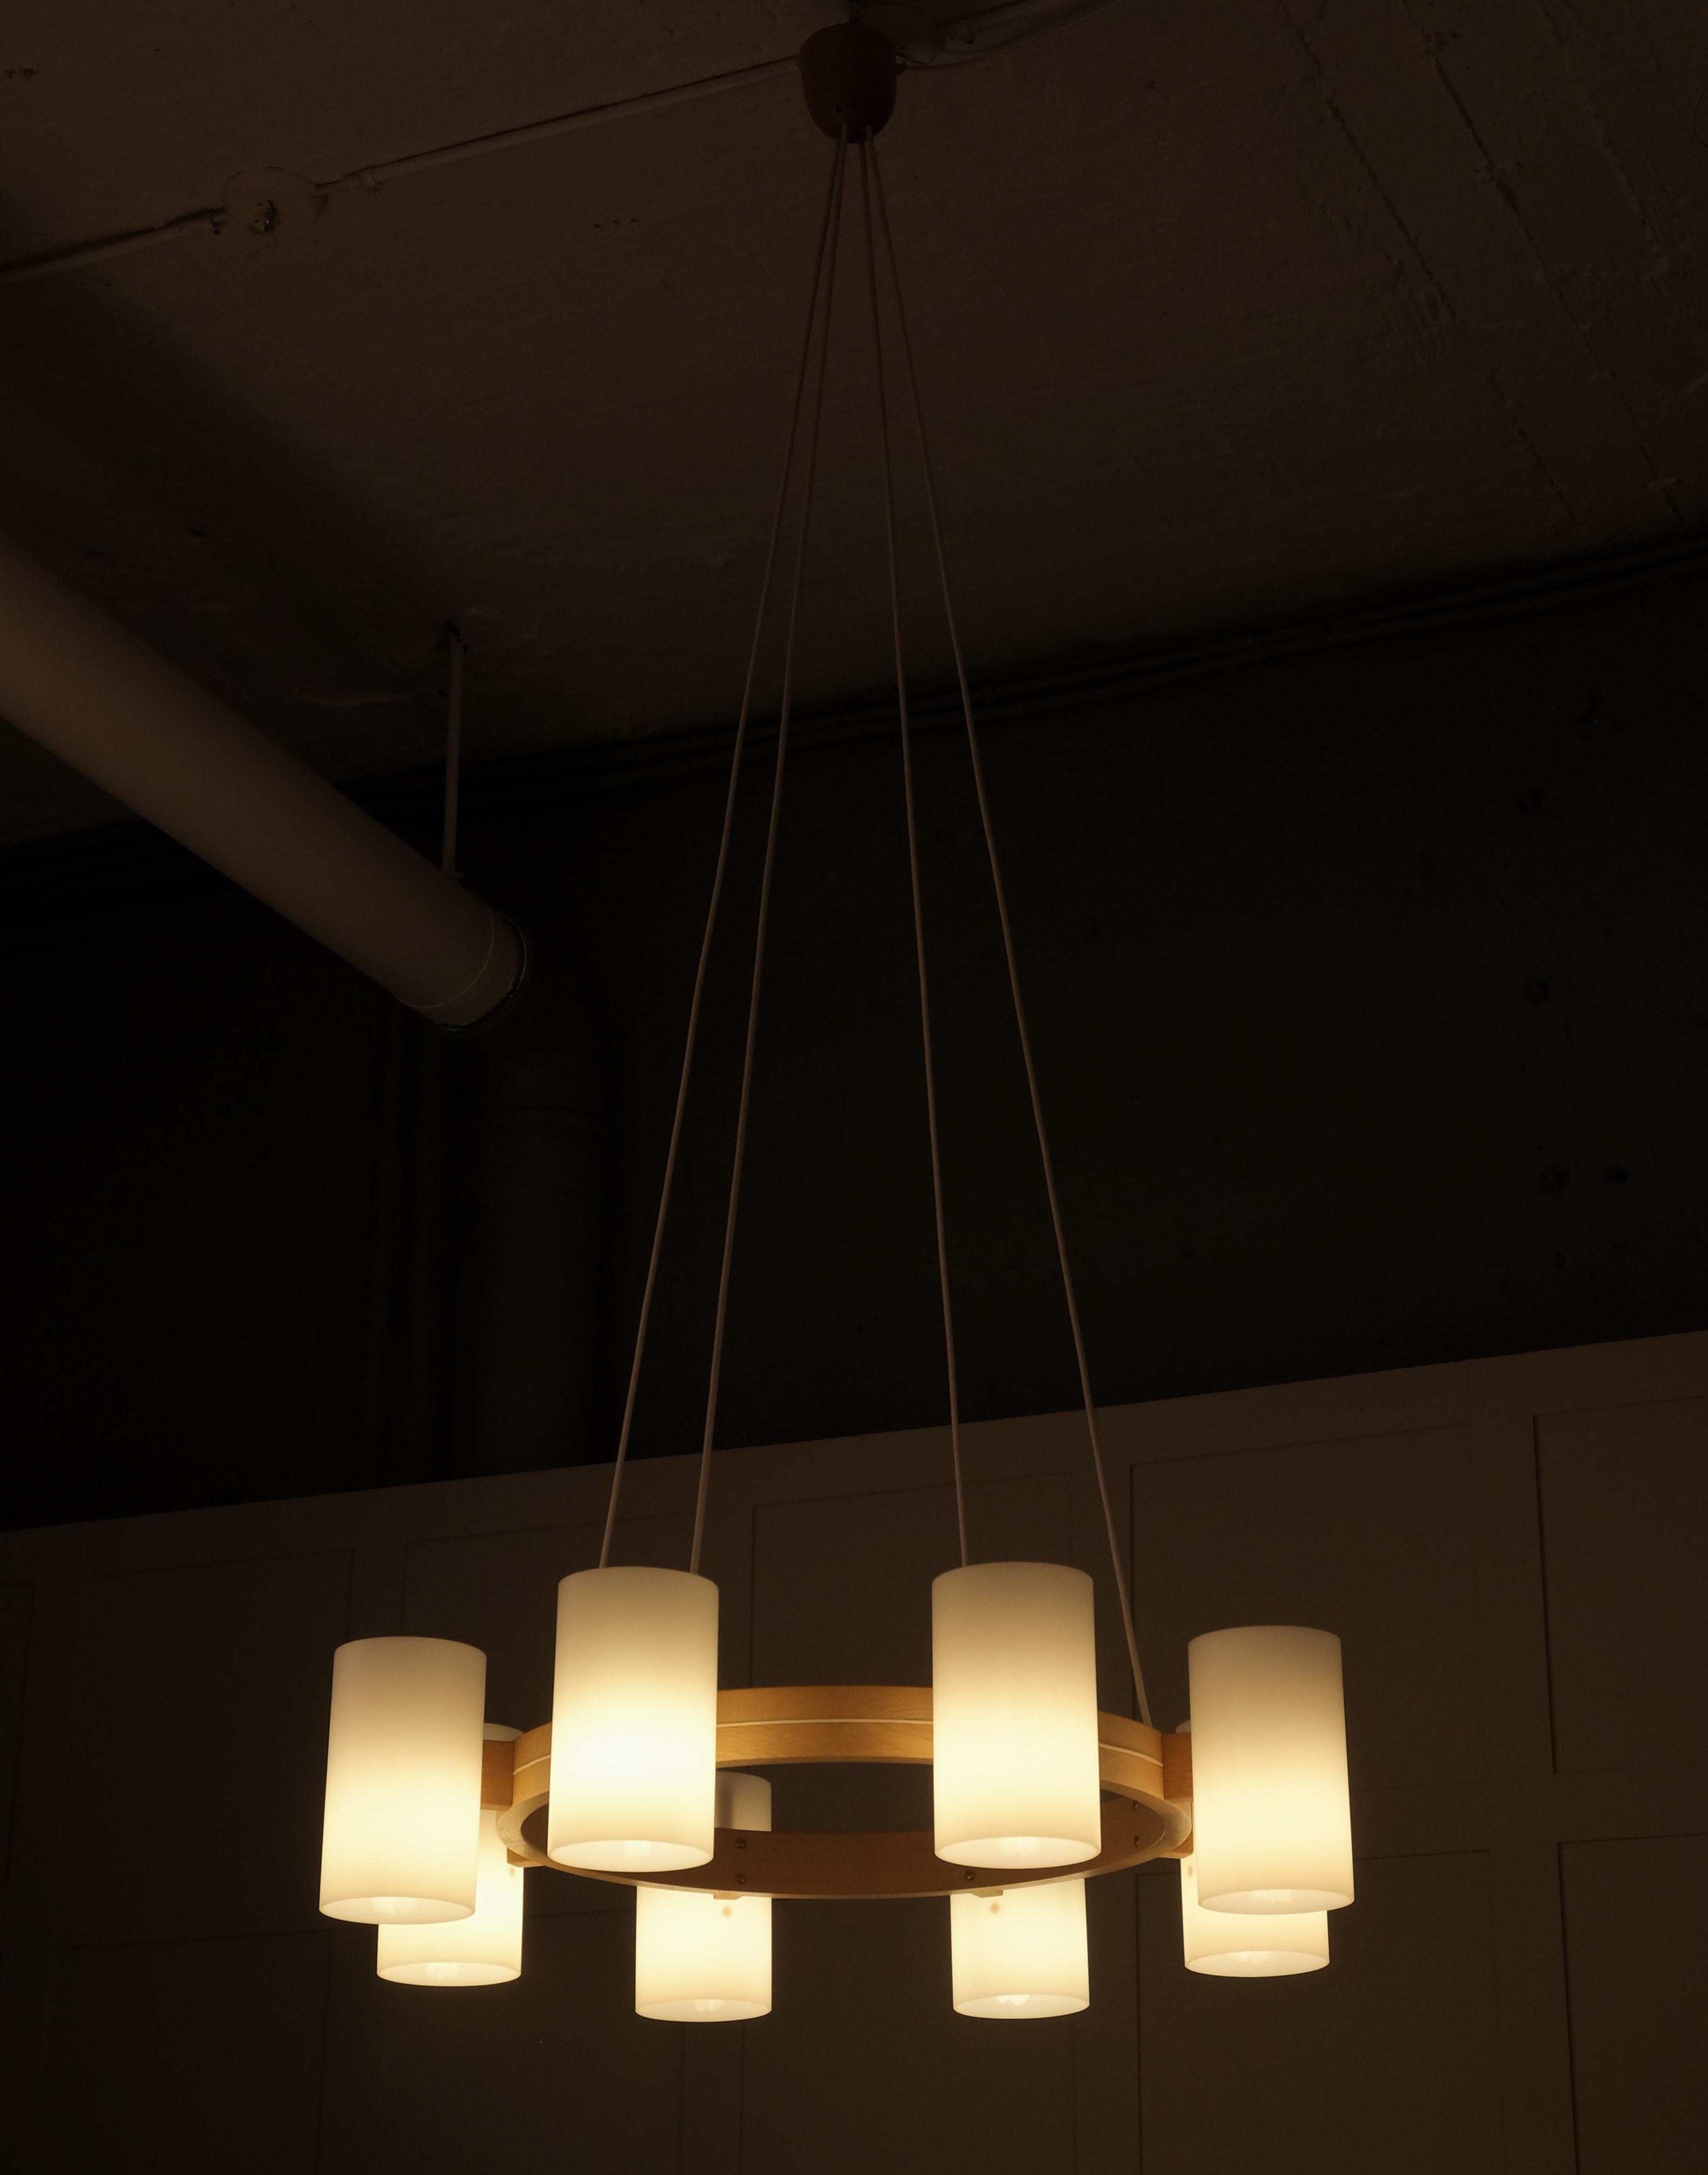 Set of 6 Chandeliers by Uno & Östen Kristiansson for Luxus, 1960s For Sale 4